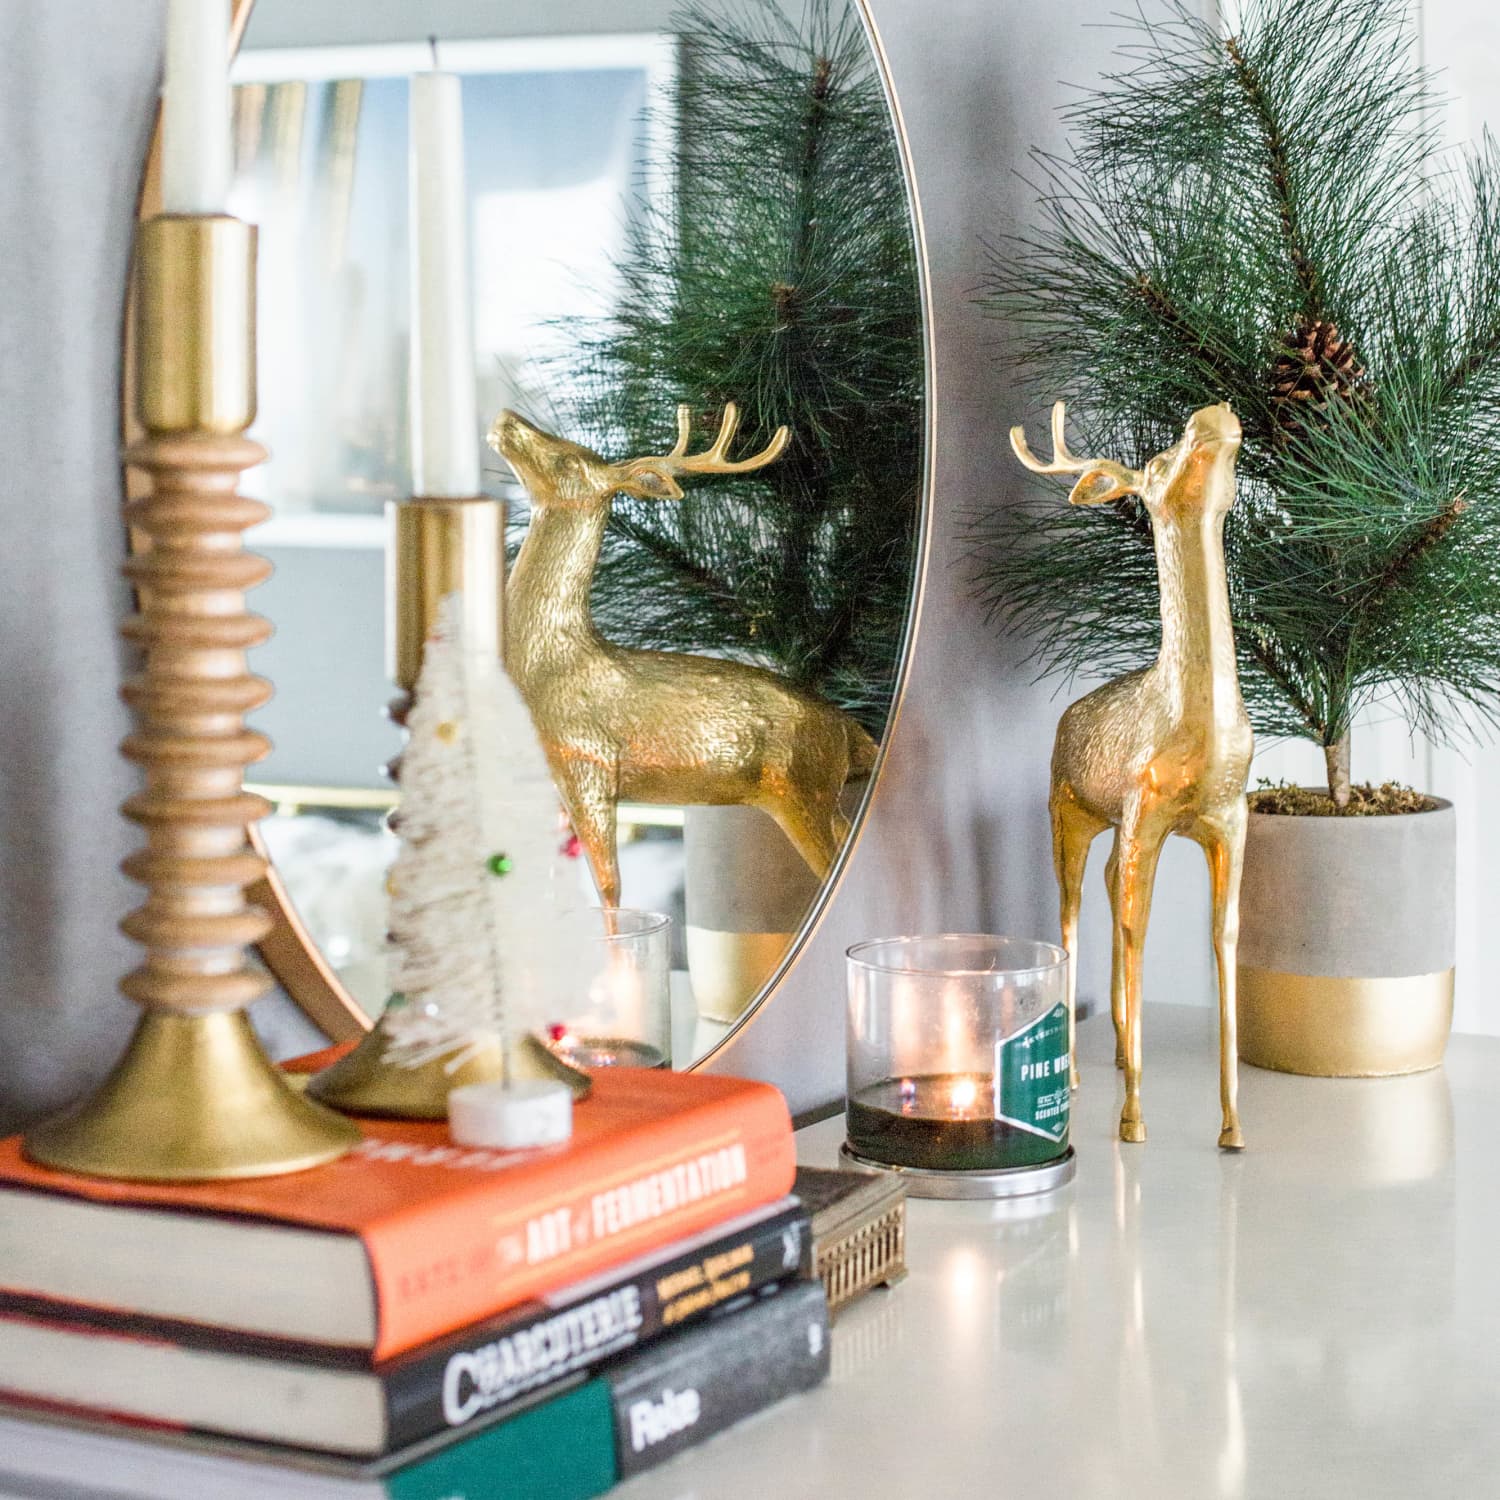 10 unexpected, out of the box Christmas tree decor ideas using